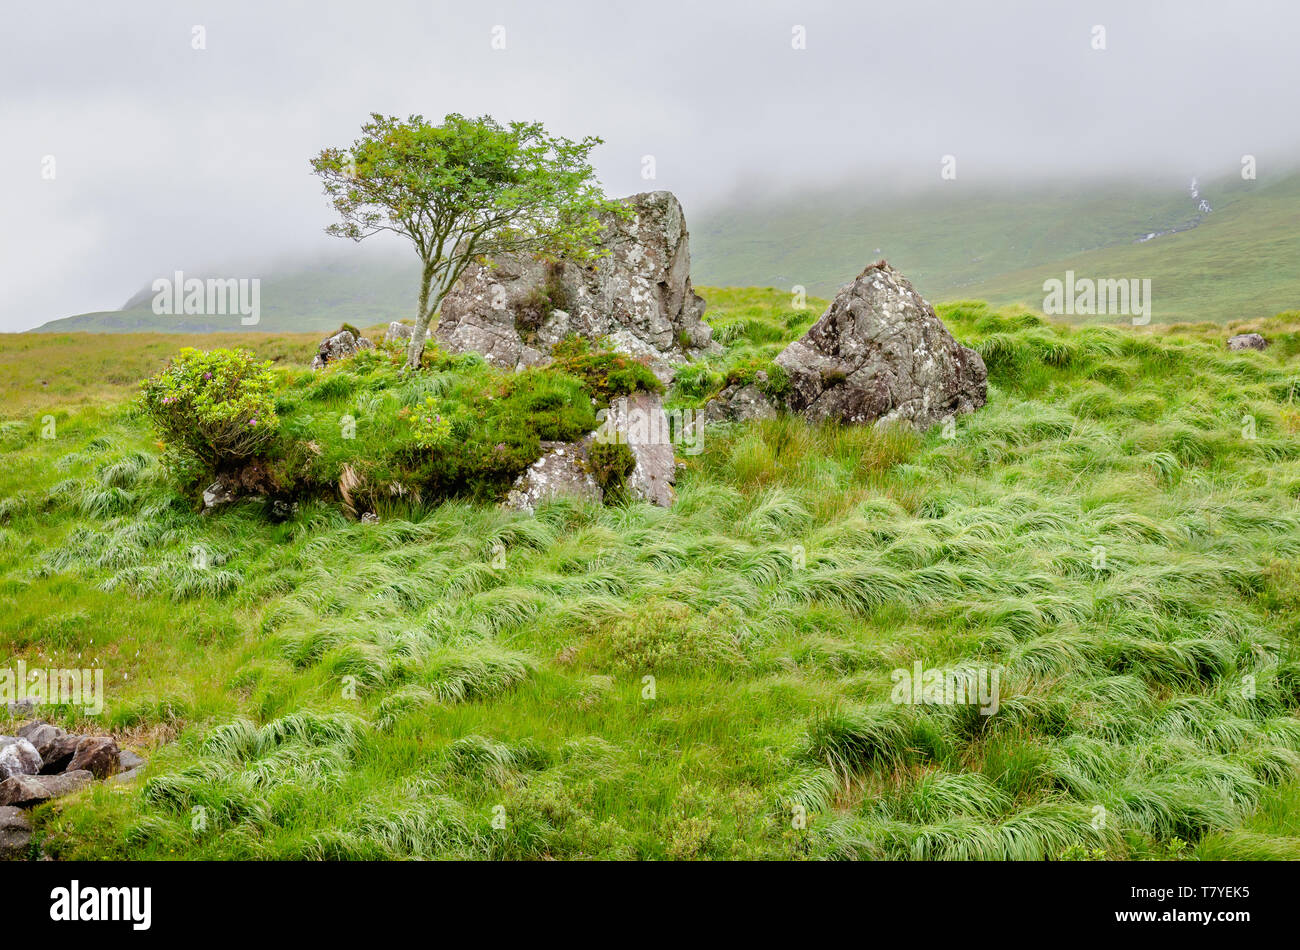 A misty and wet landscape scene from the heart of the scenically breath-taking Delphi Valley, near Leenane, Connemara, Co. Galway, Ireland. Stock Photo